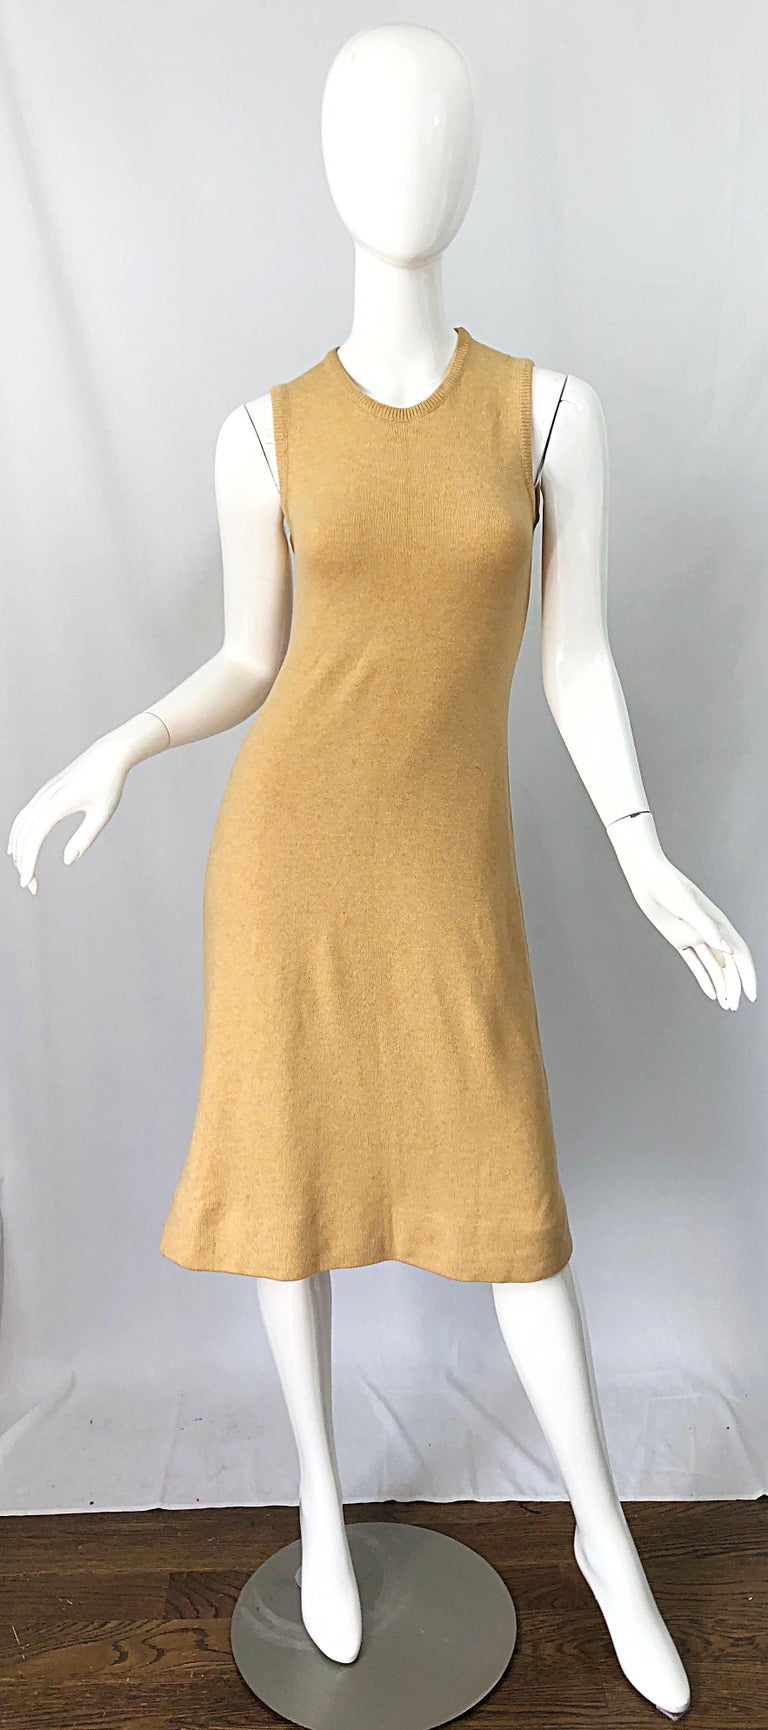 1970s HALSTON Cashmere Camel Tan 70s Vintage Dress and Cardigan Sweater Jacket In Excellent Condition For Sale In San Diego, CA